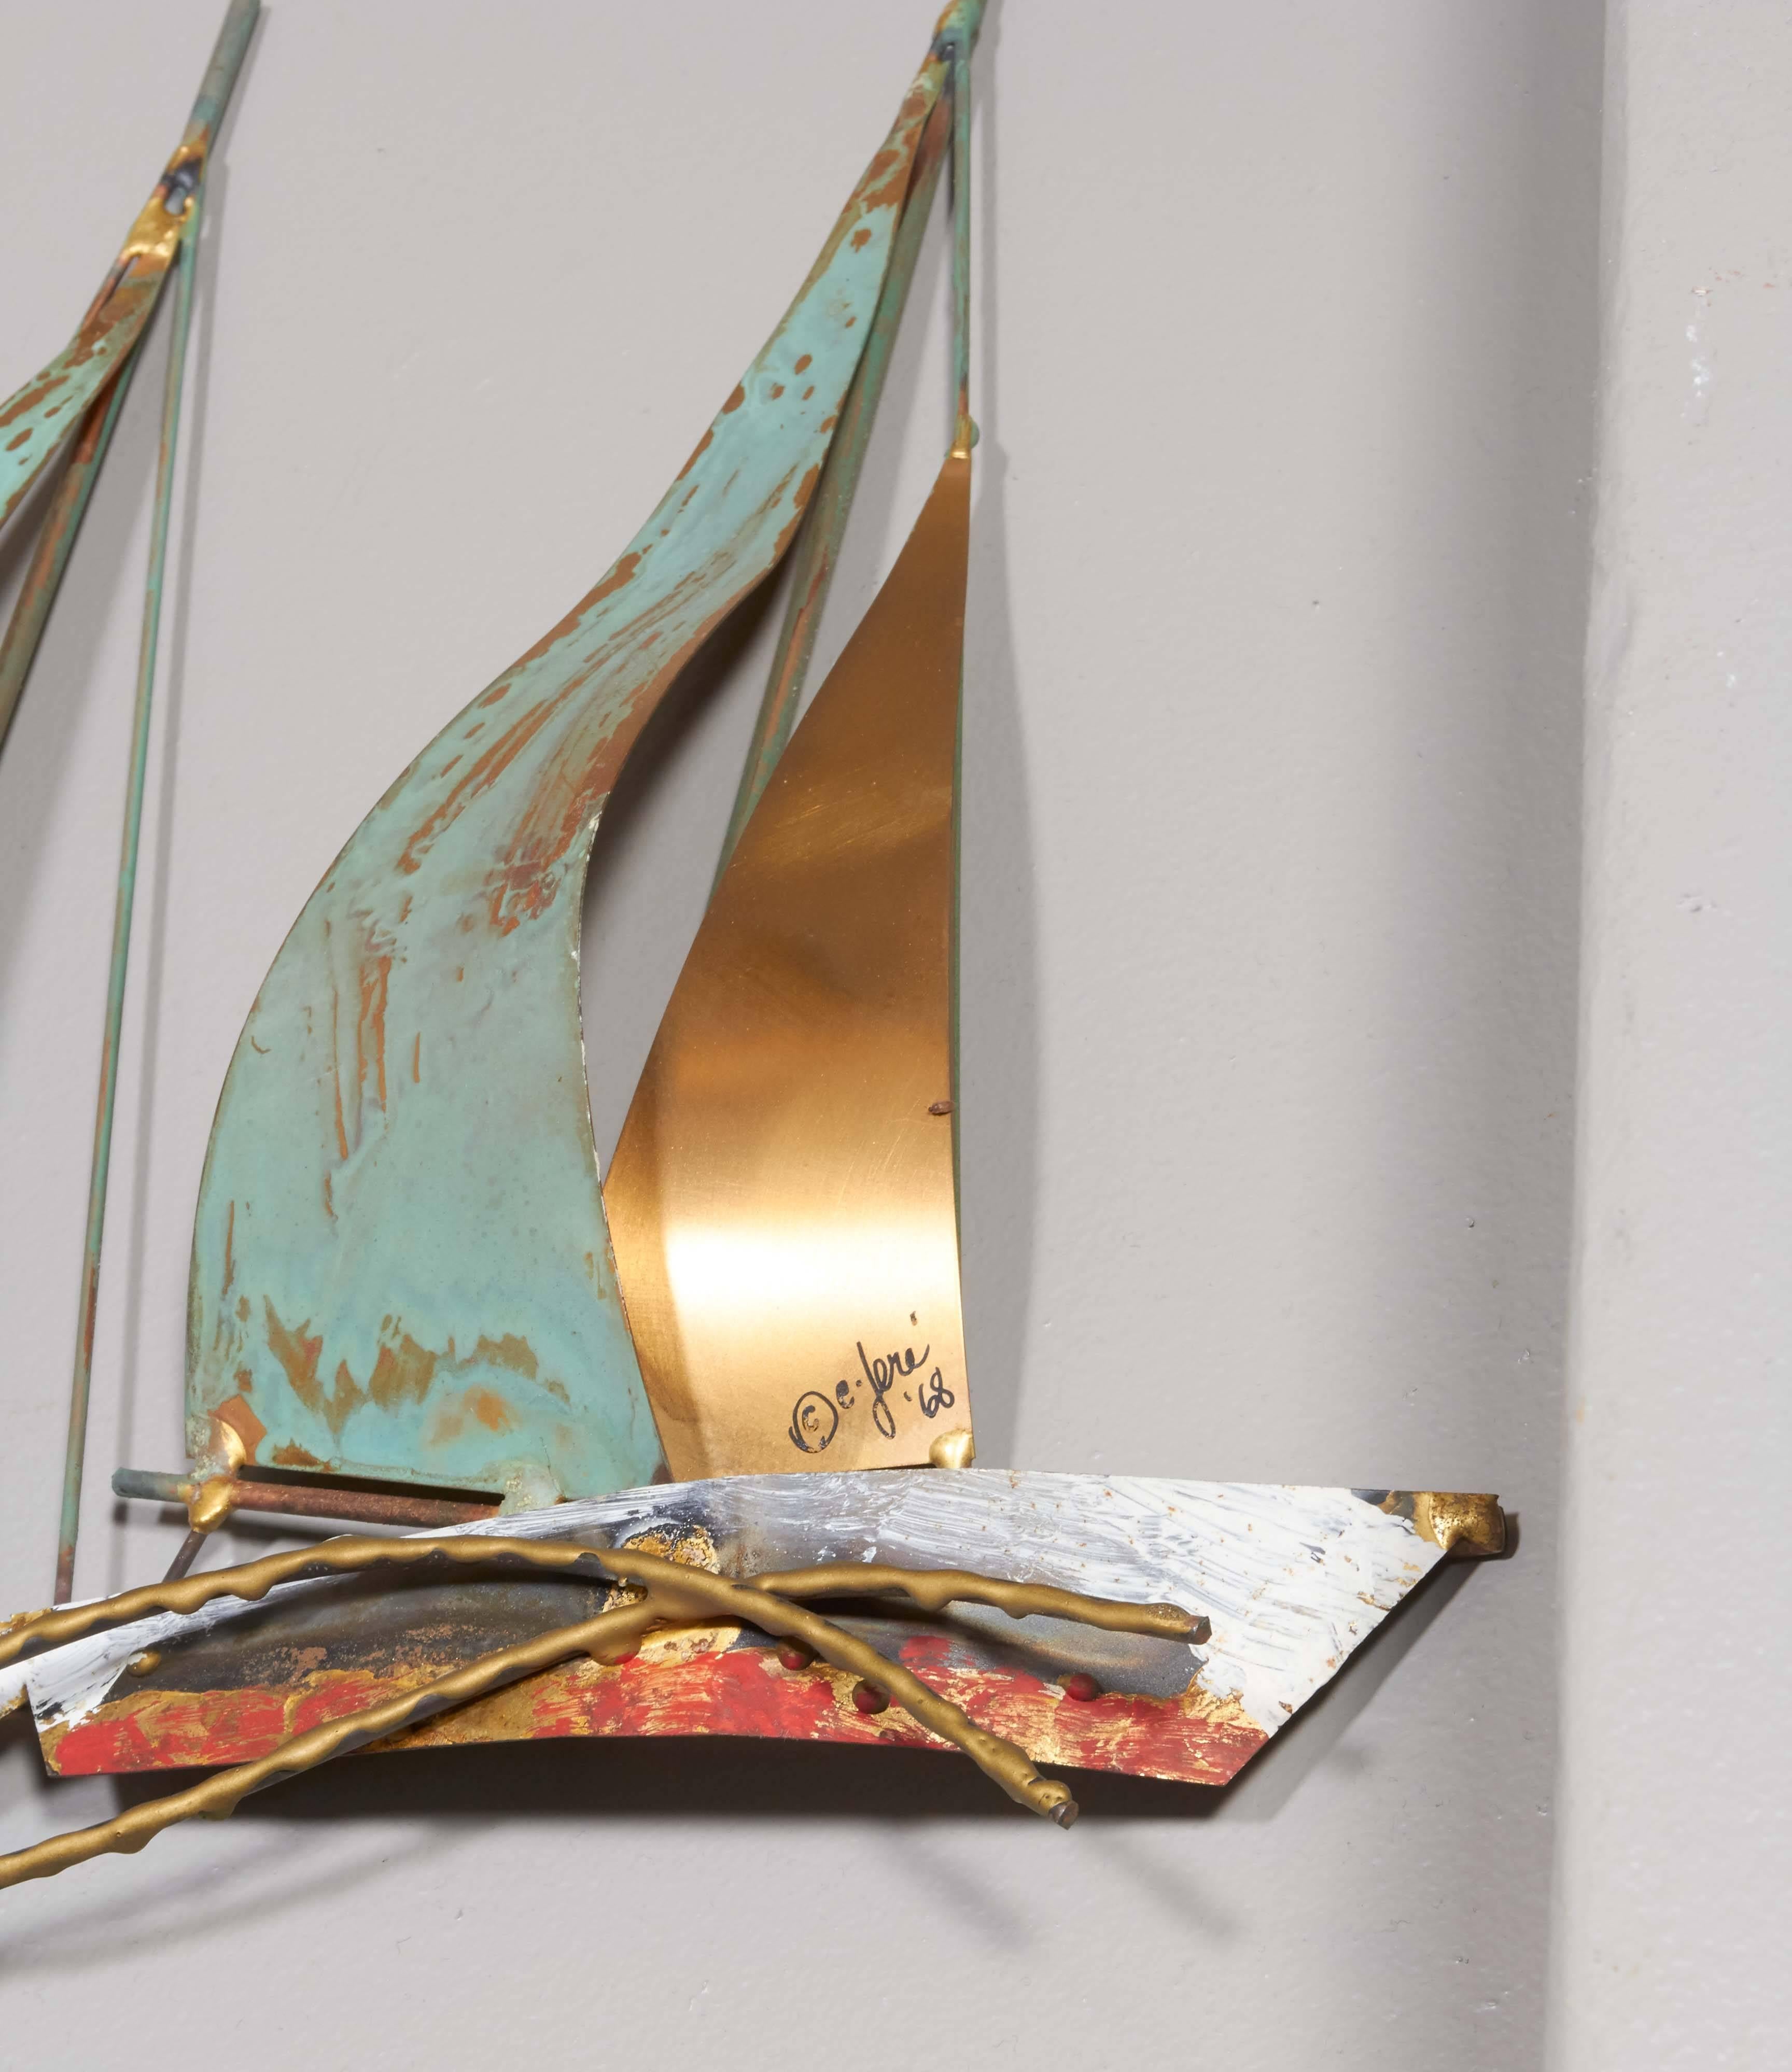 Patinated Curtis Jere Brutalist Wall Sculpture with Sailboats, Signed and Dated